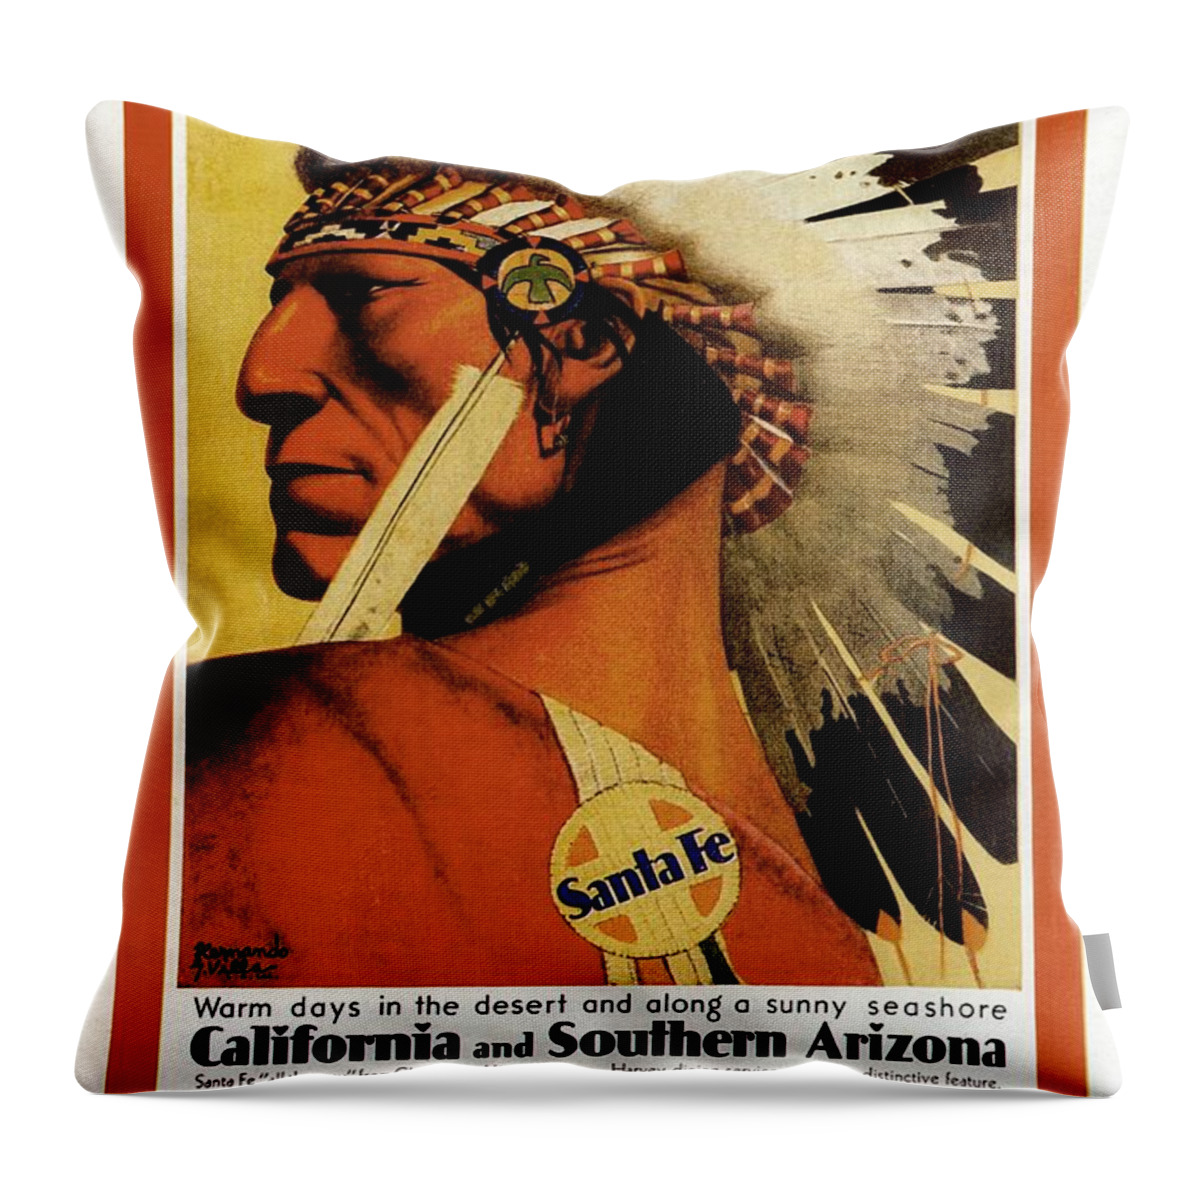 Red Indian Throw Pillow featuring the mixed media California - Southern Arizona - Red Indian - Native American - Santa Fe - Vintage Advertising Poster by Studio Grafiikka